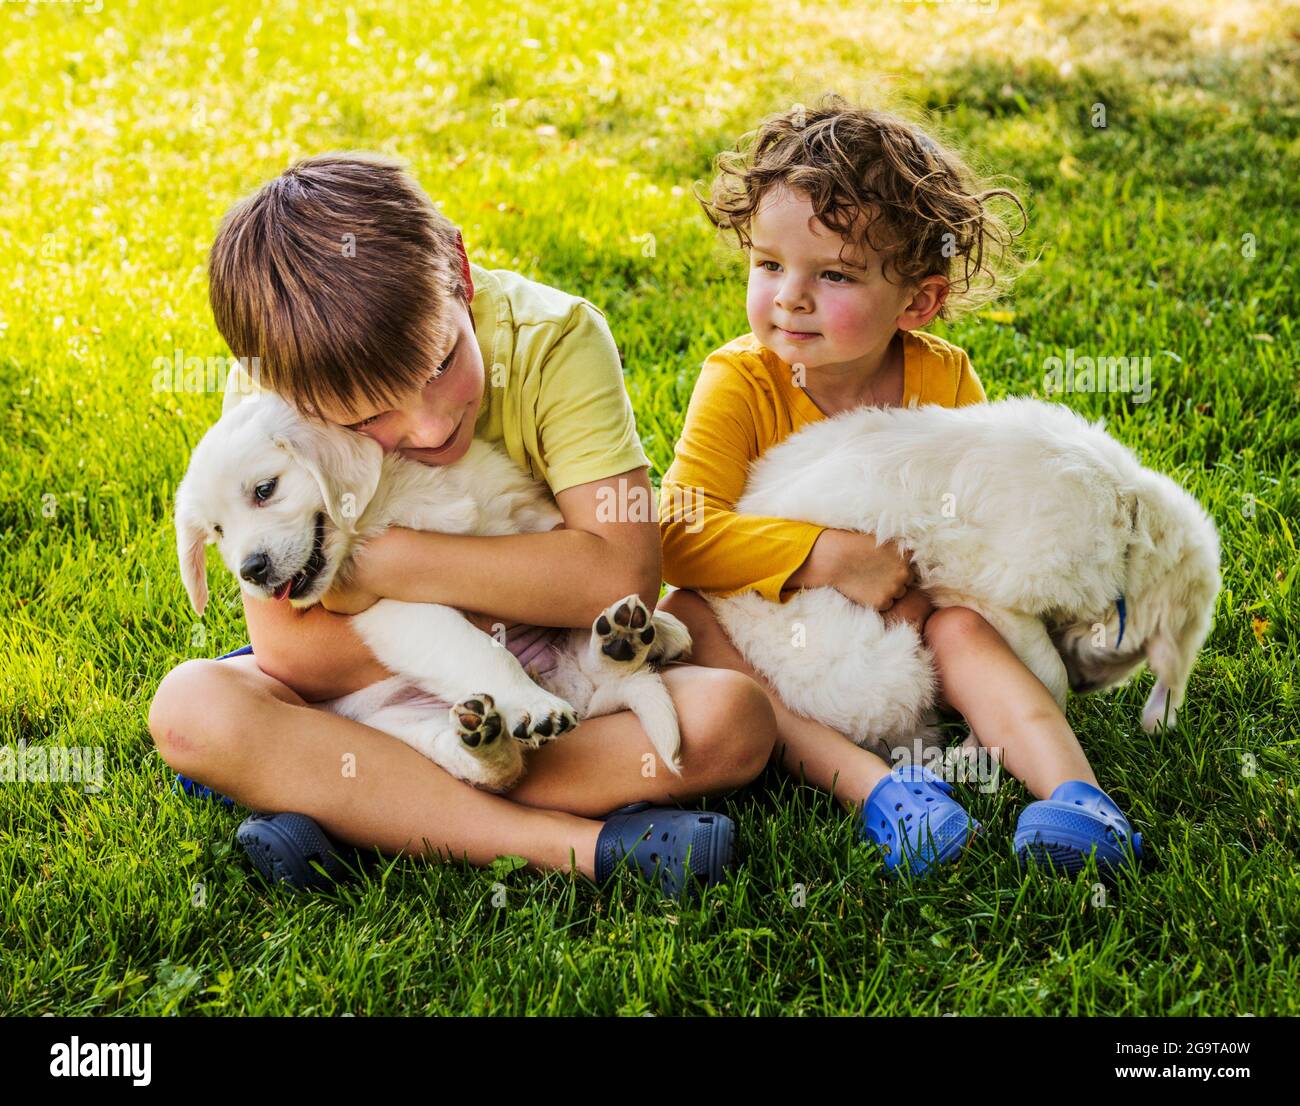 Two young children playing on grass with six week old Platinum, or ...